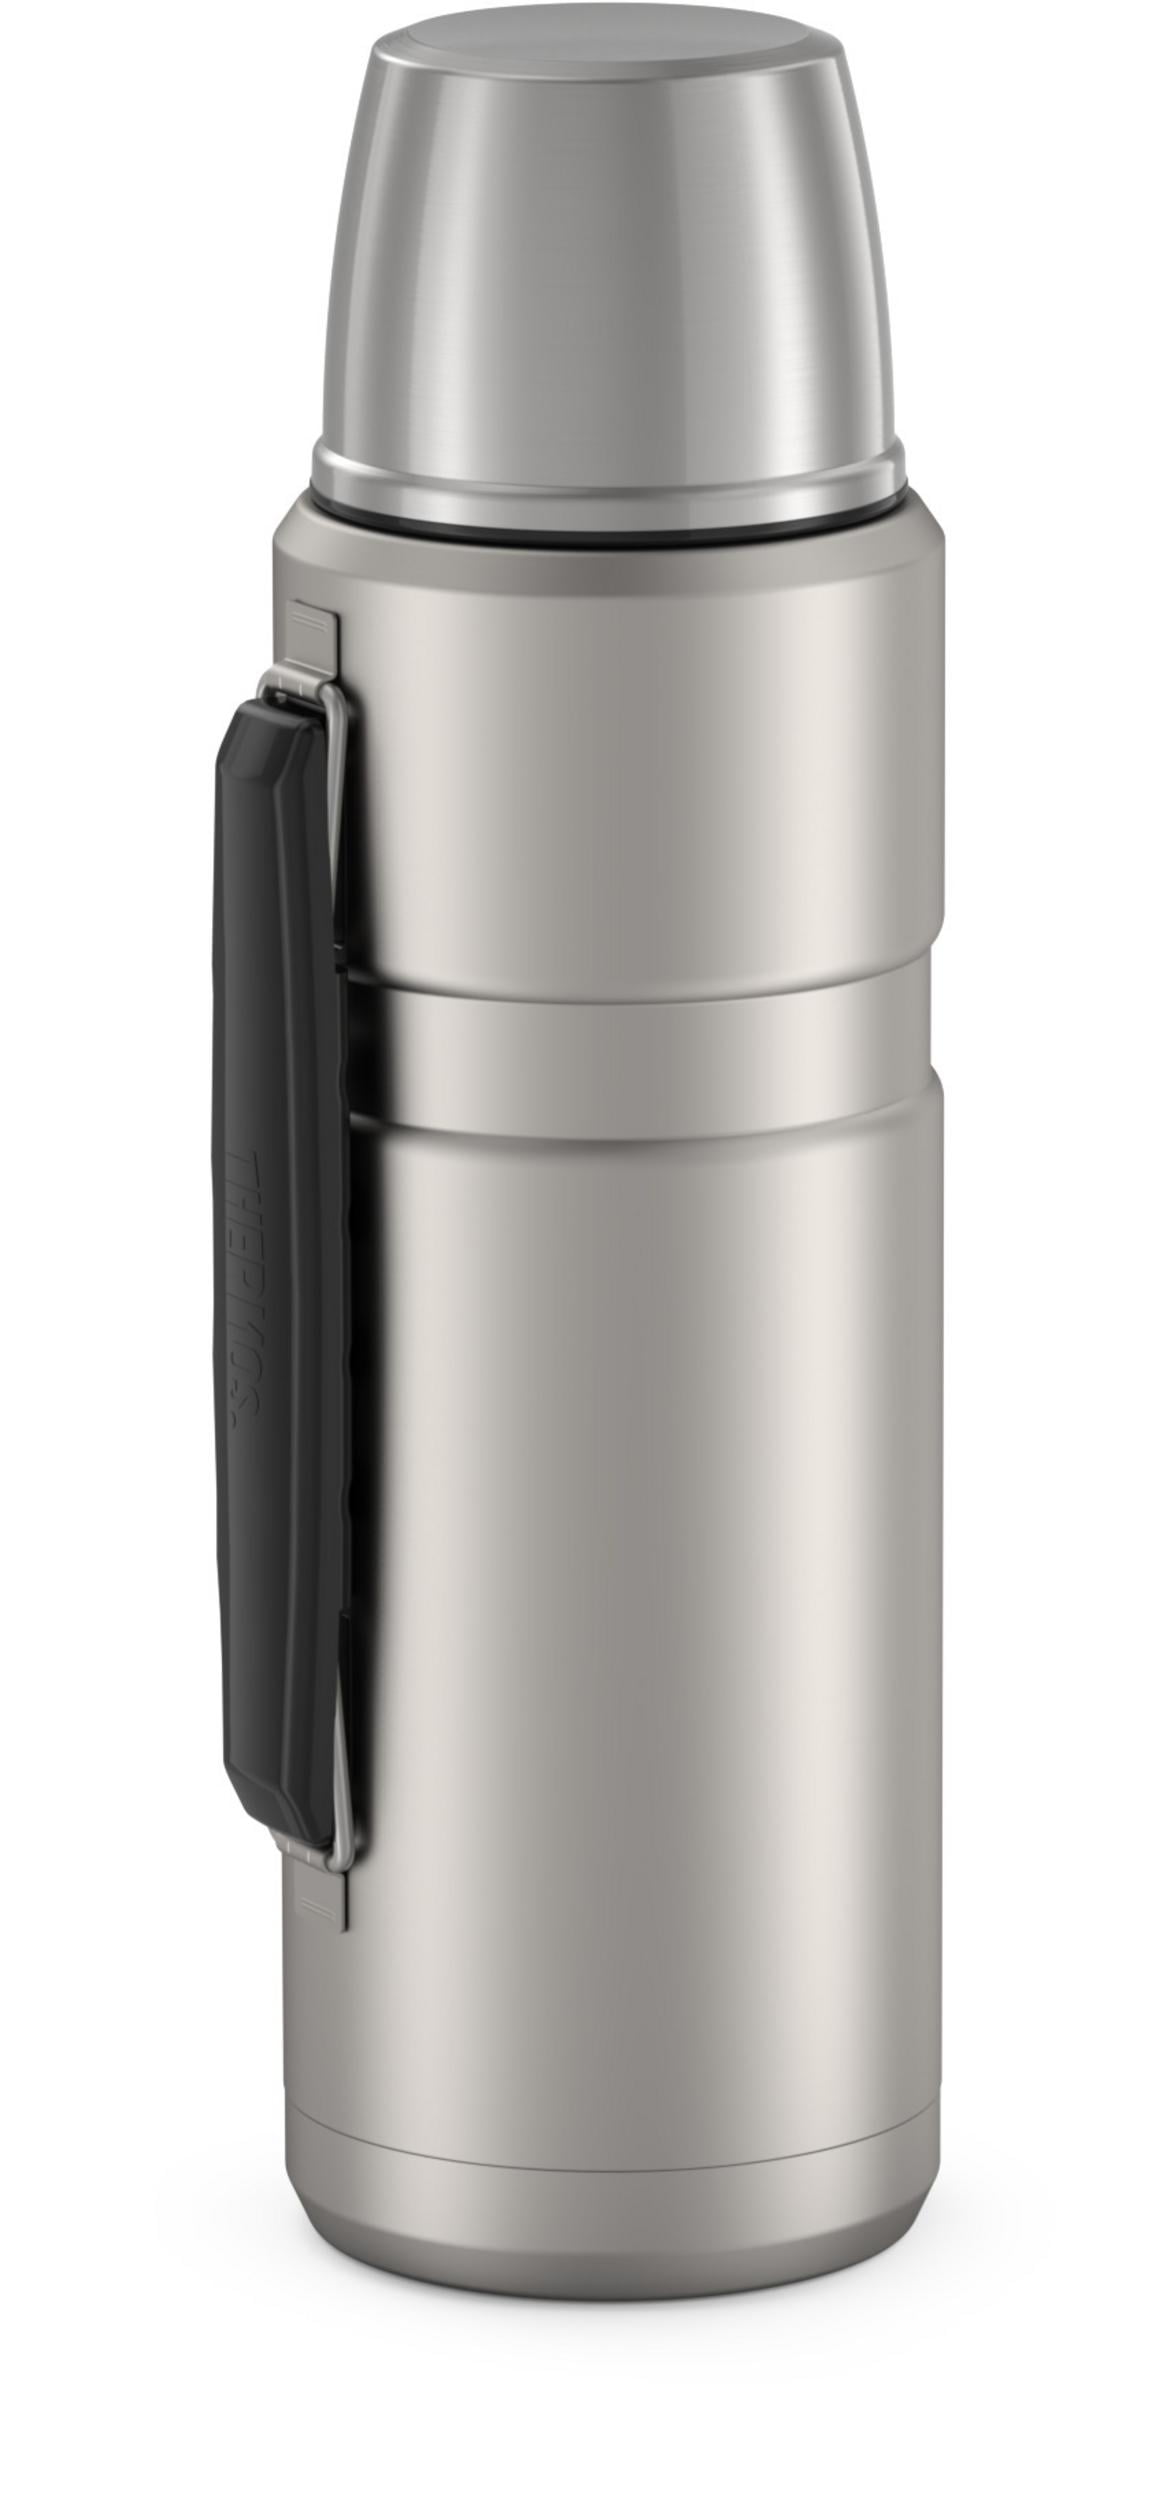 Thermos 68 oz/ 2L Stainless King Insulated Bottle - Model SK2020 - Black